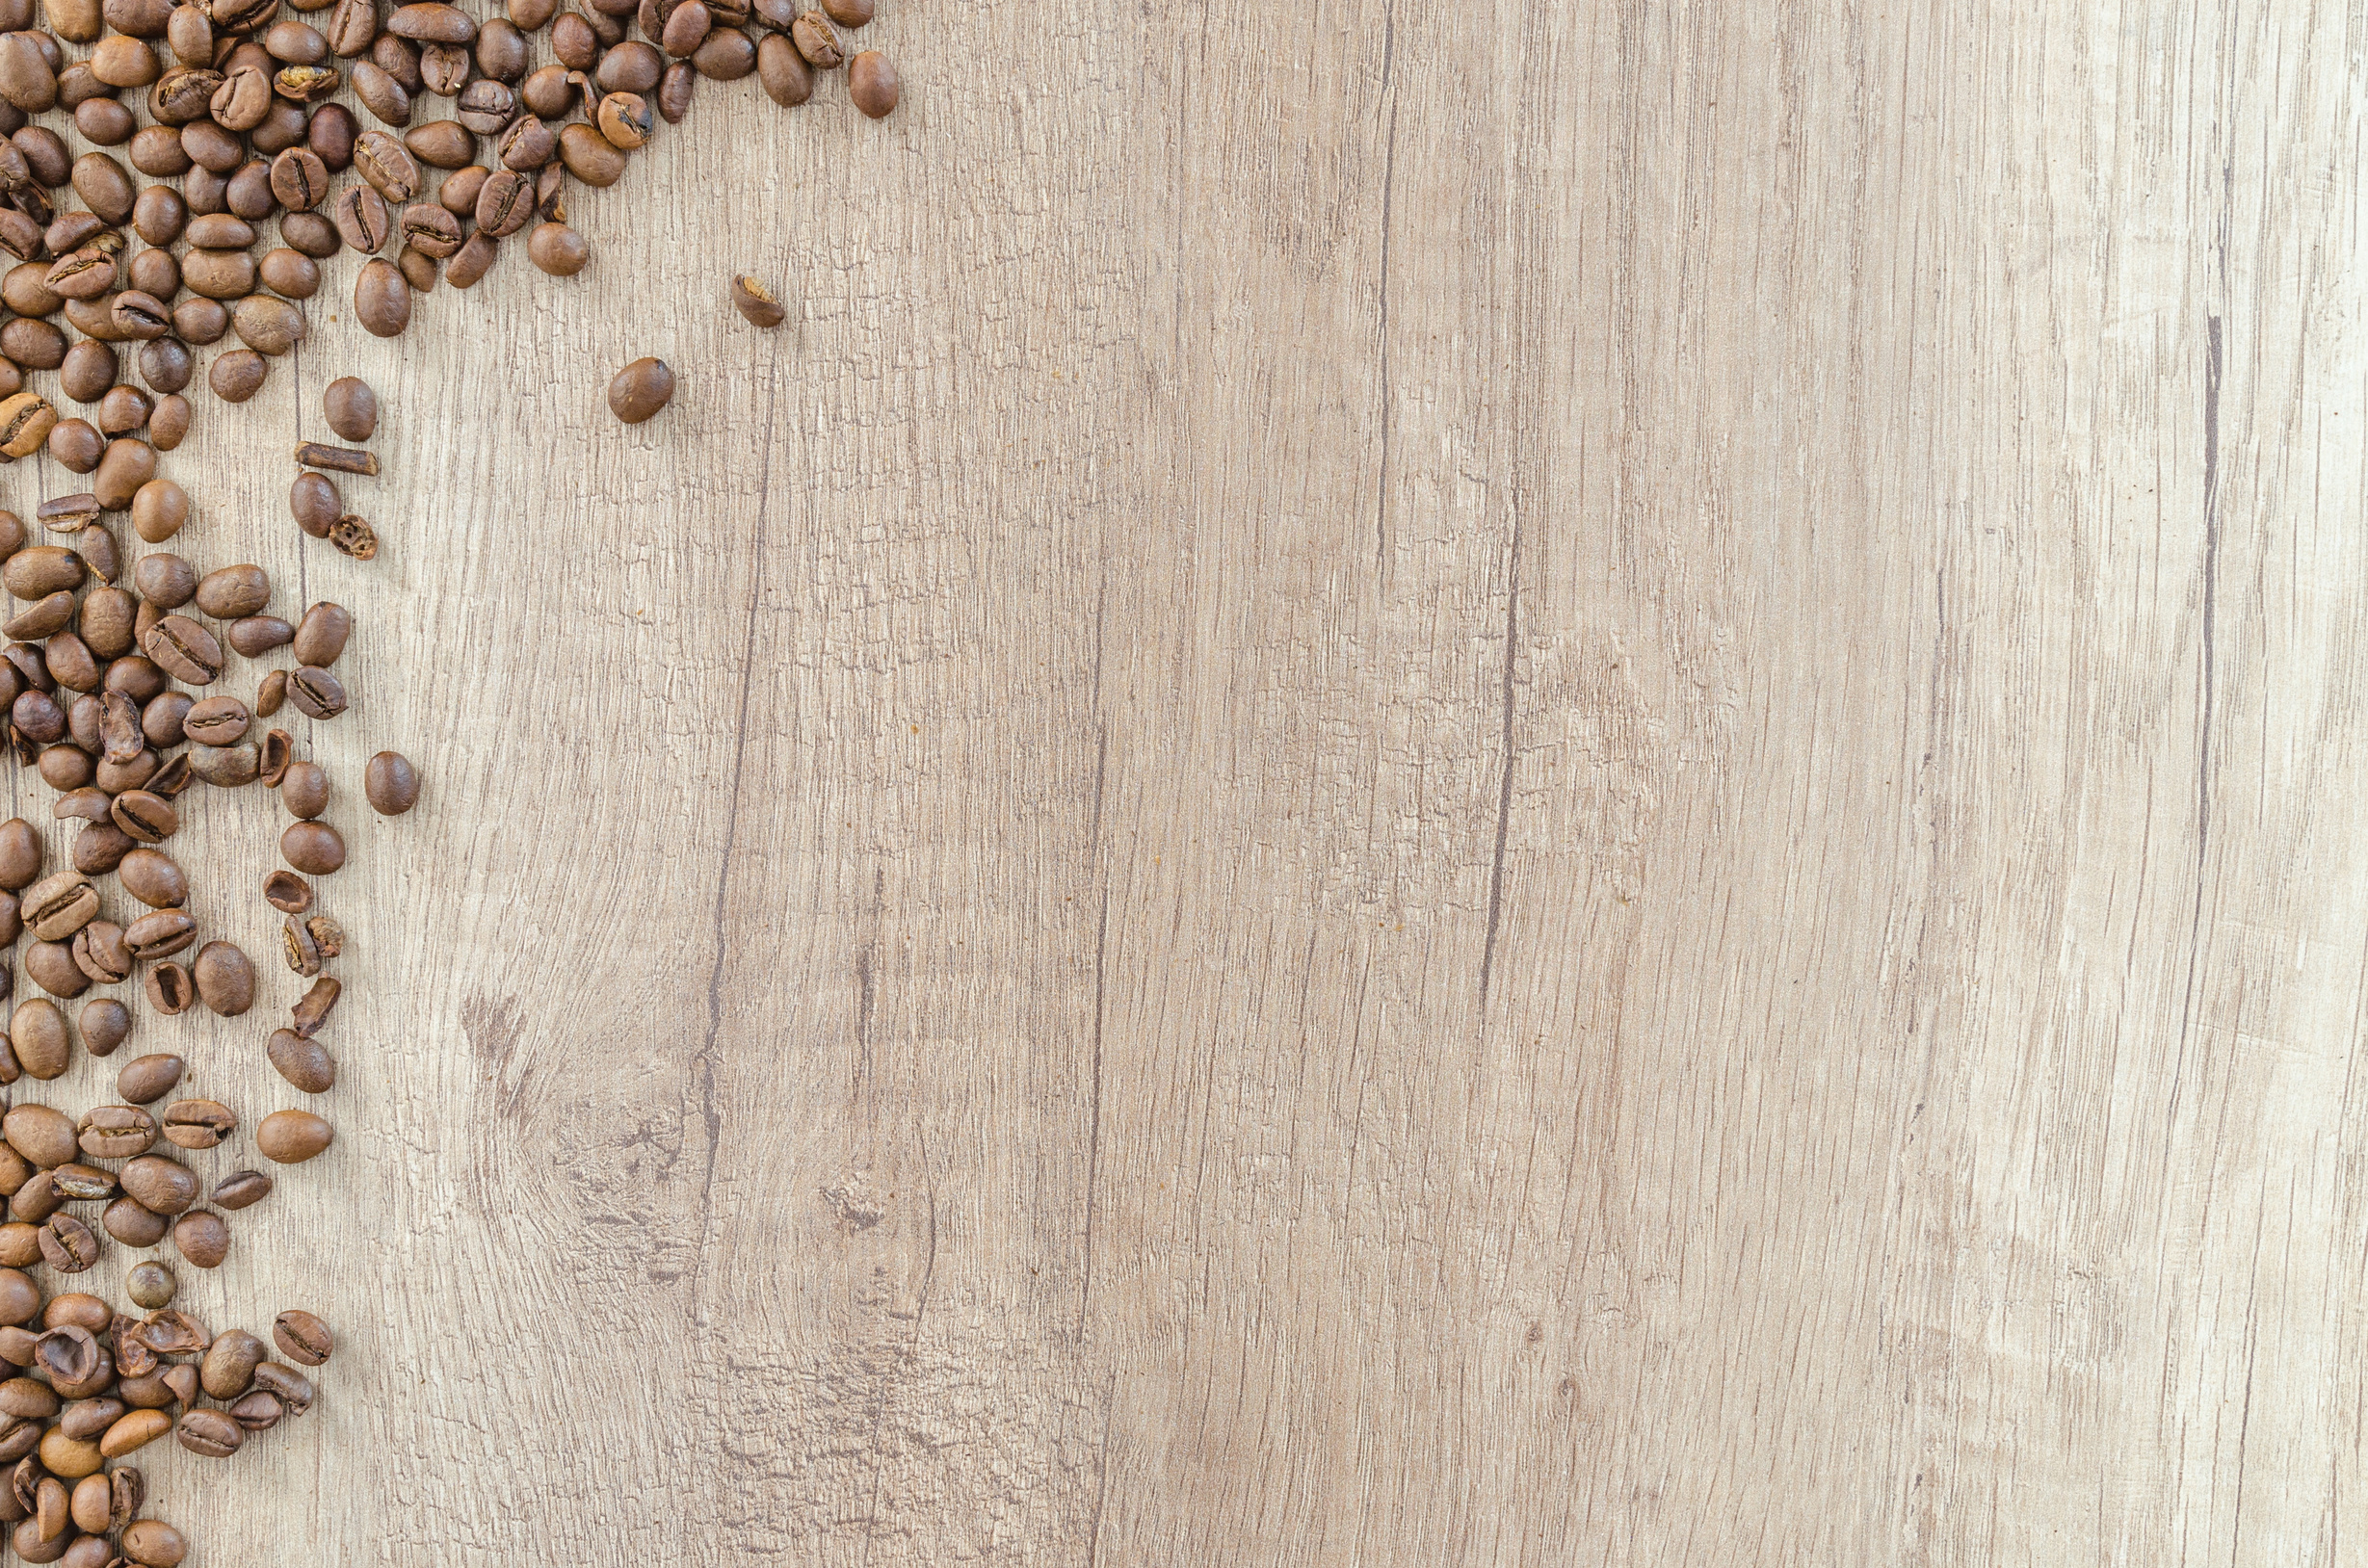 Coffee Beans on a Wooden Background